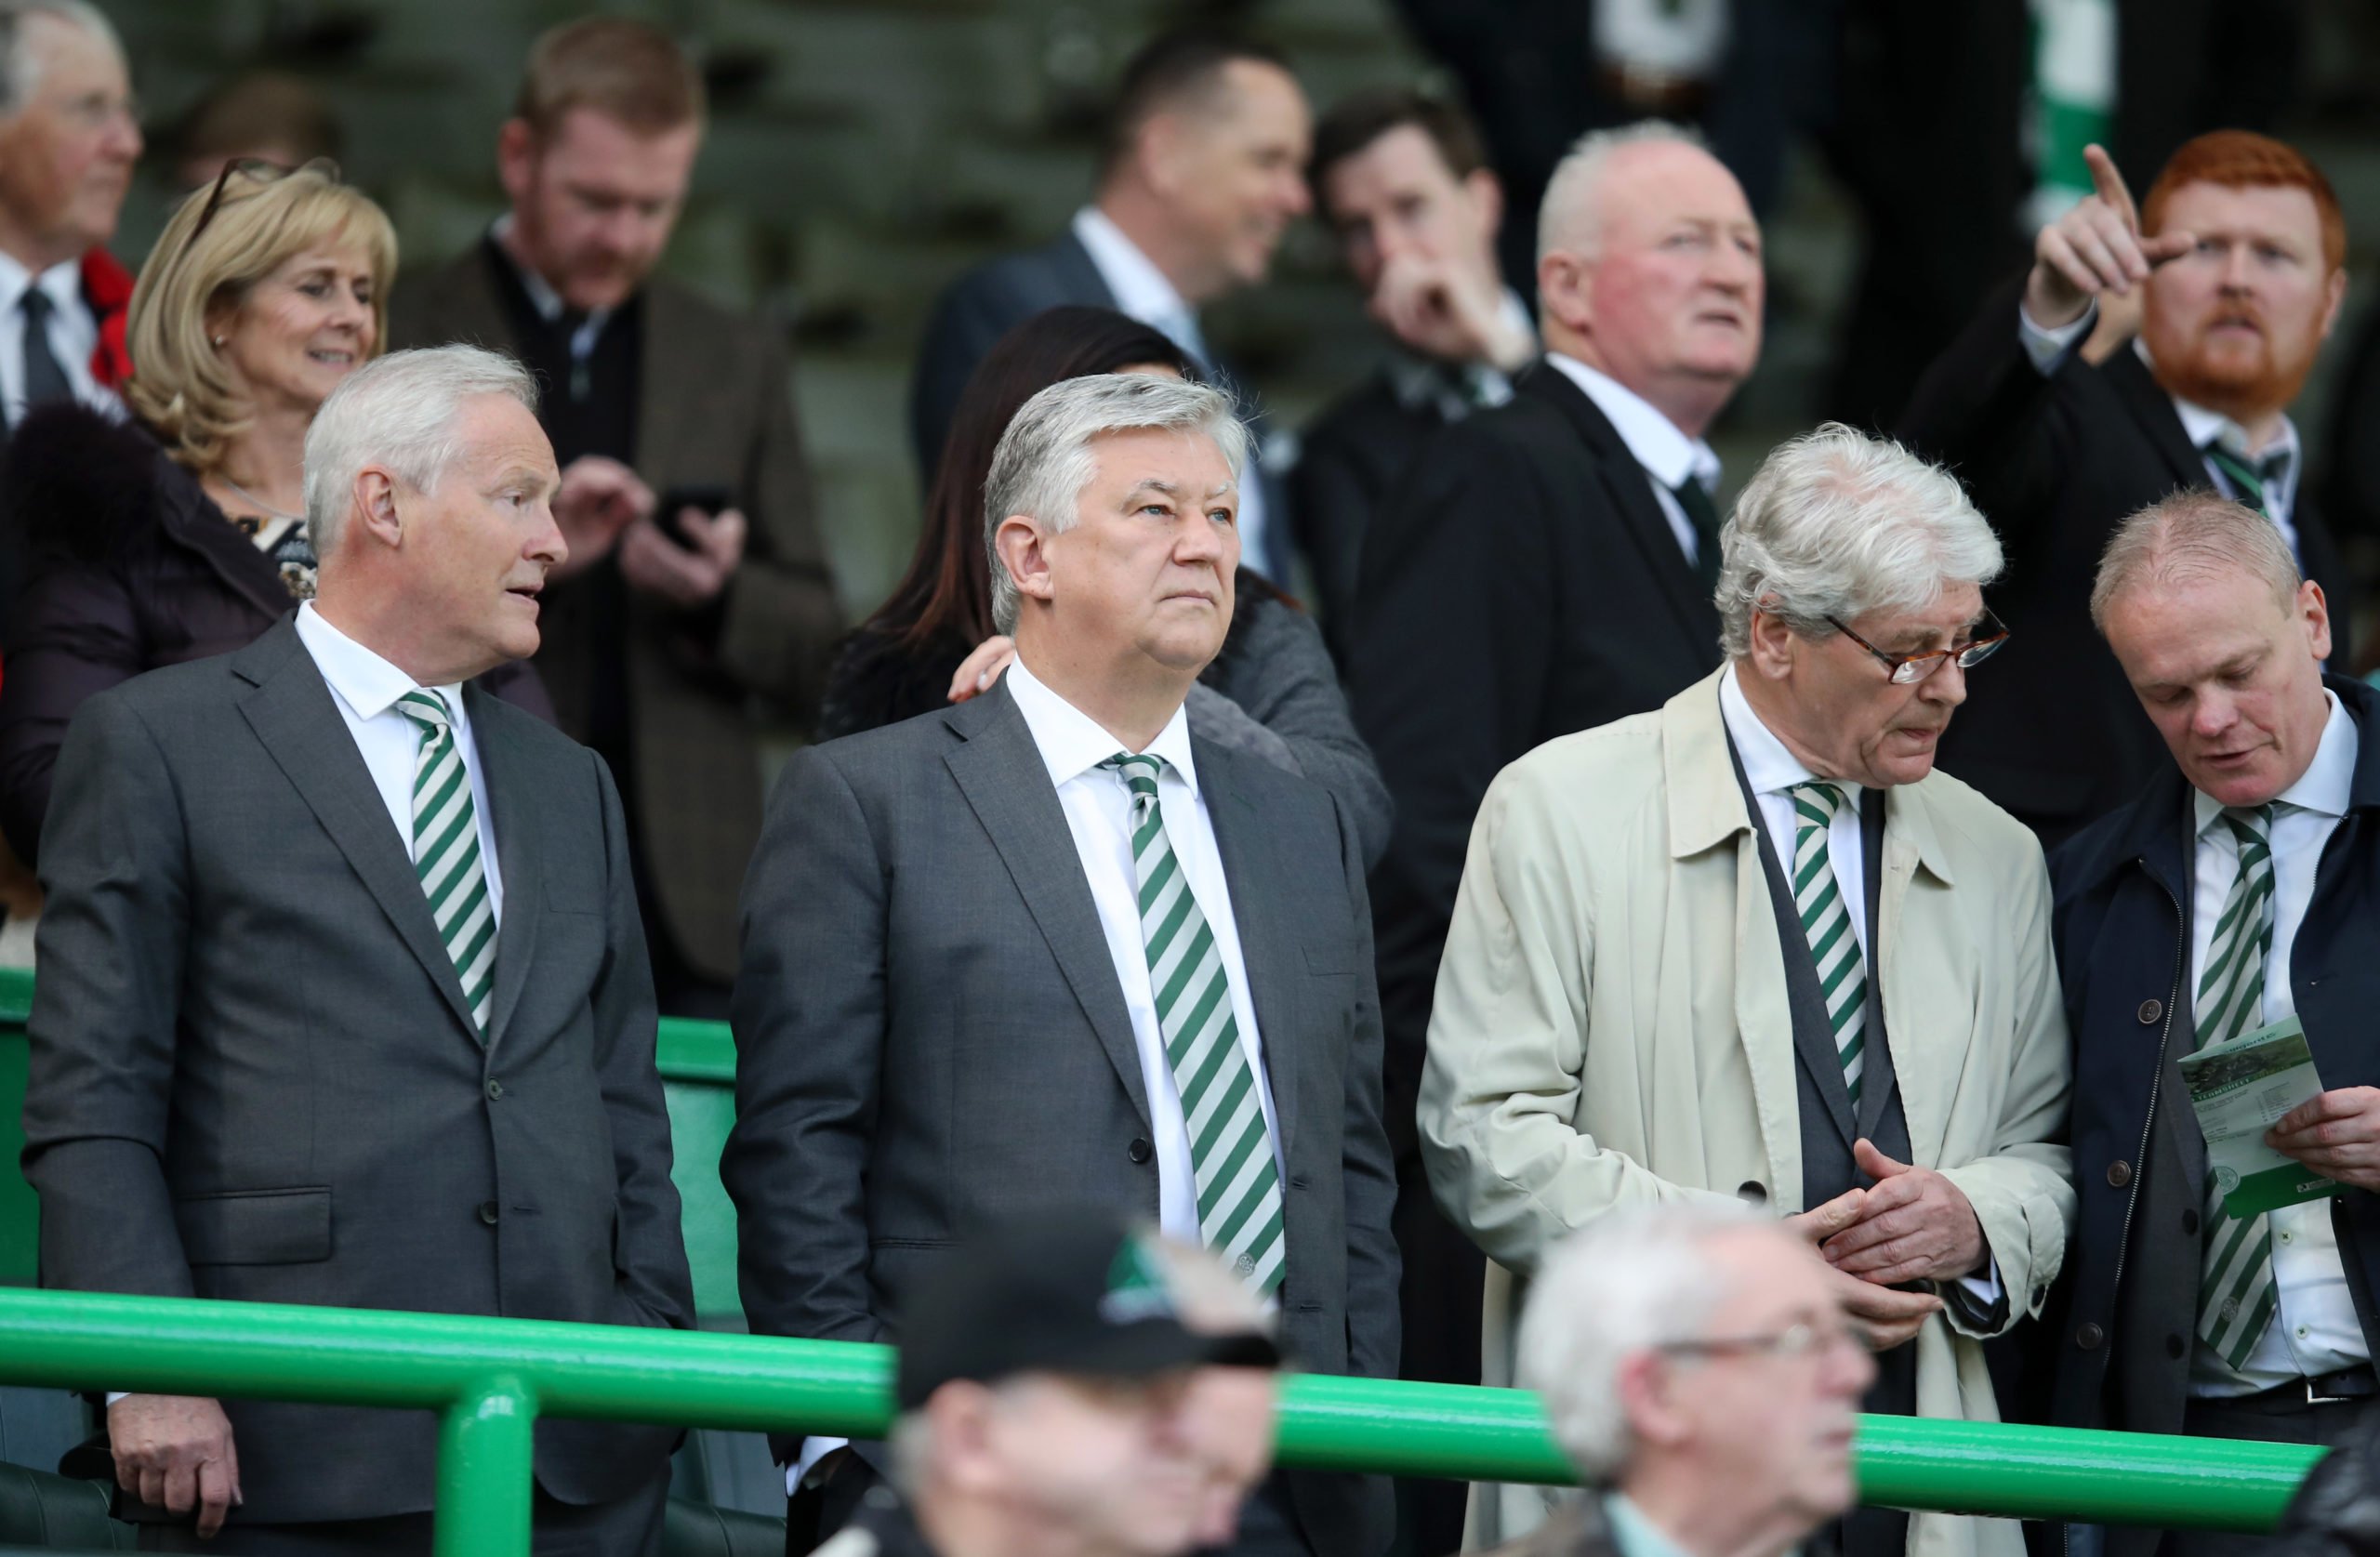 Celtic Peter Lawwell